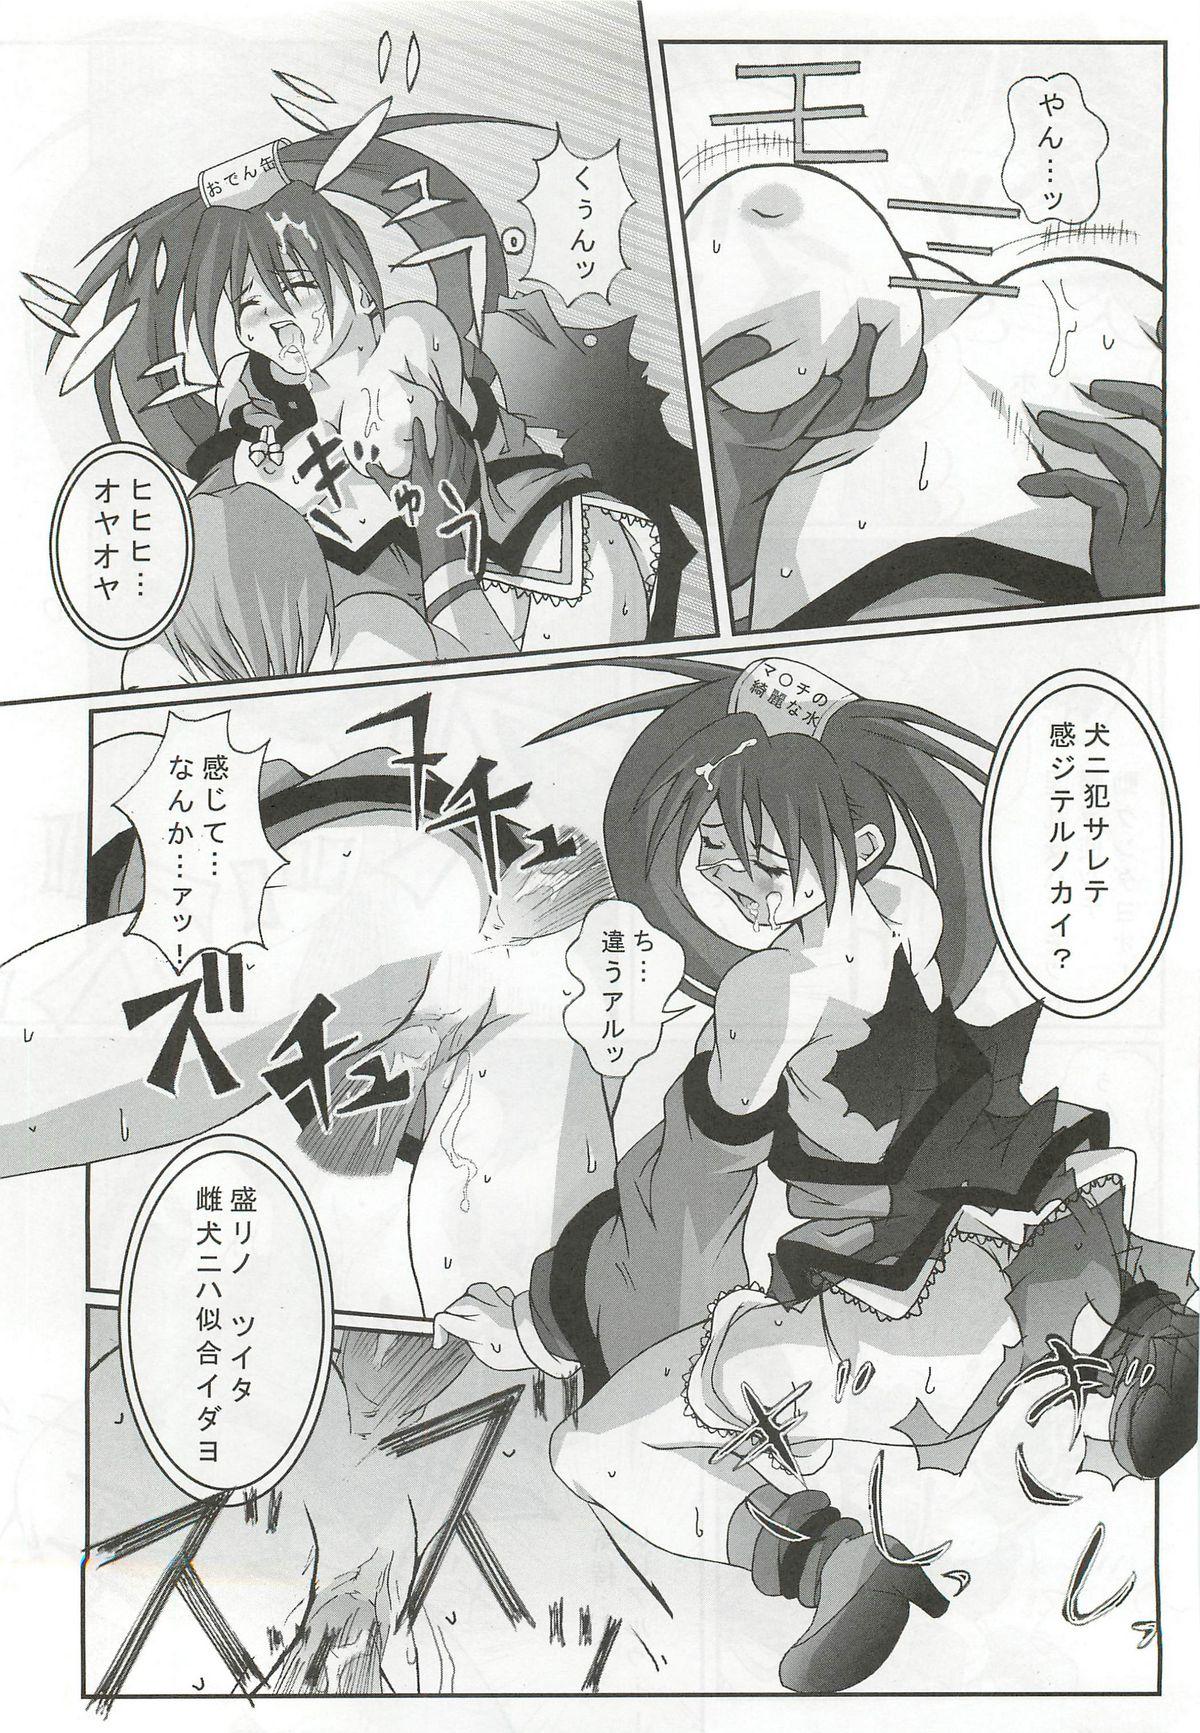 Tanned Passionless 2 - Guilty gear Club - Page 11